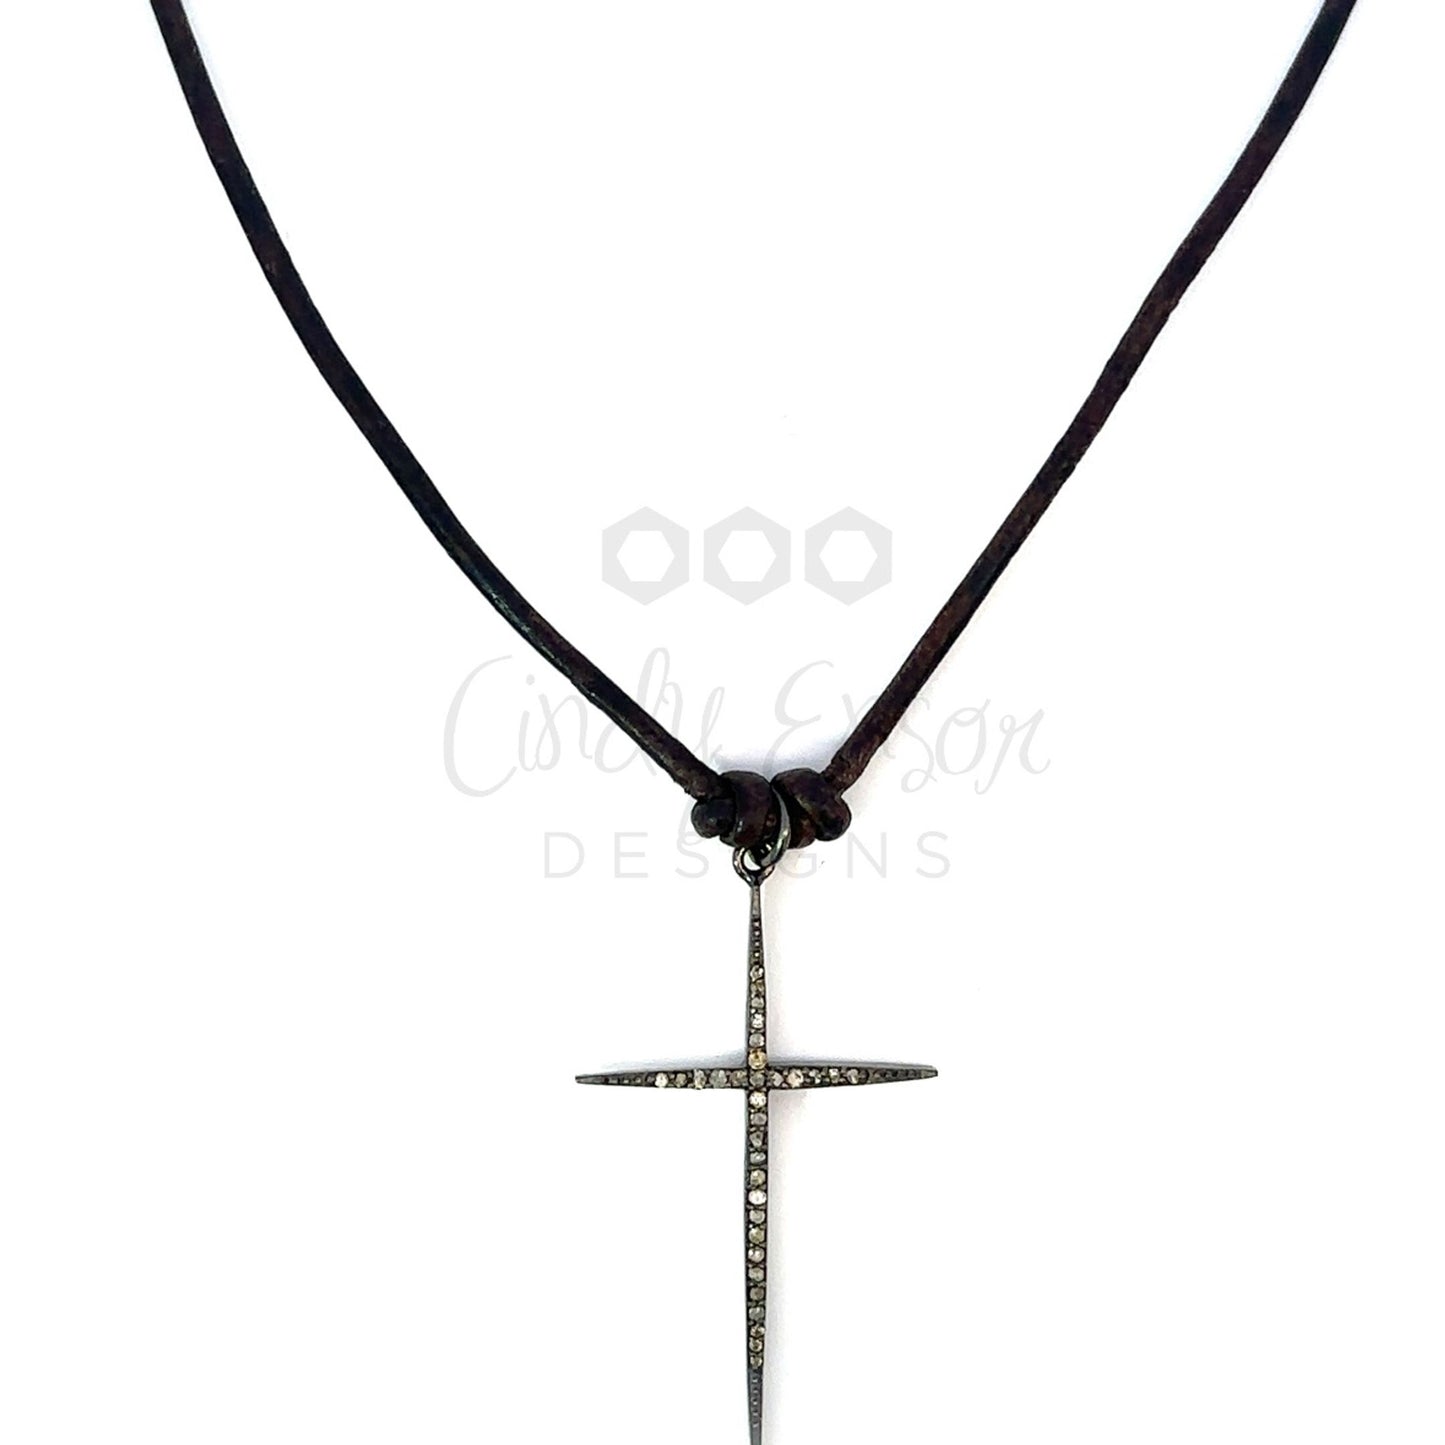 Leather Cord Necklace with Pave Diamond Accent Piece